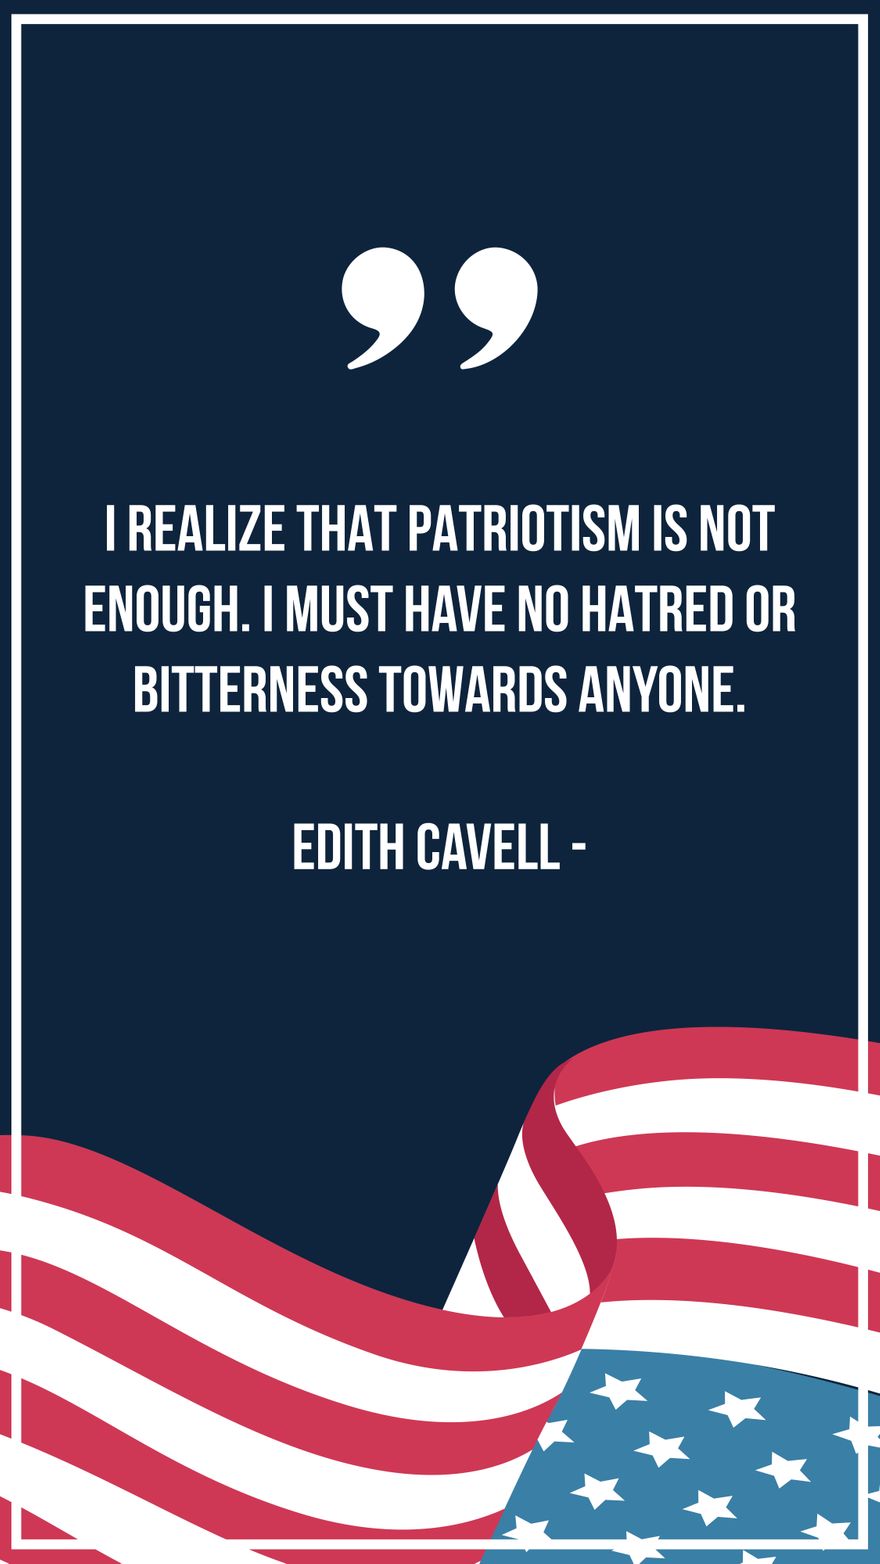 Edith Cavell - I realize that patriotism is not enough. I must have no hatred or bitterness towards anyone.